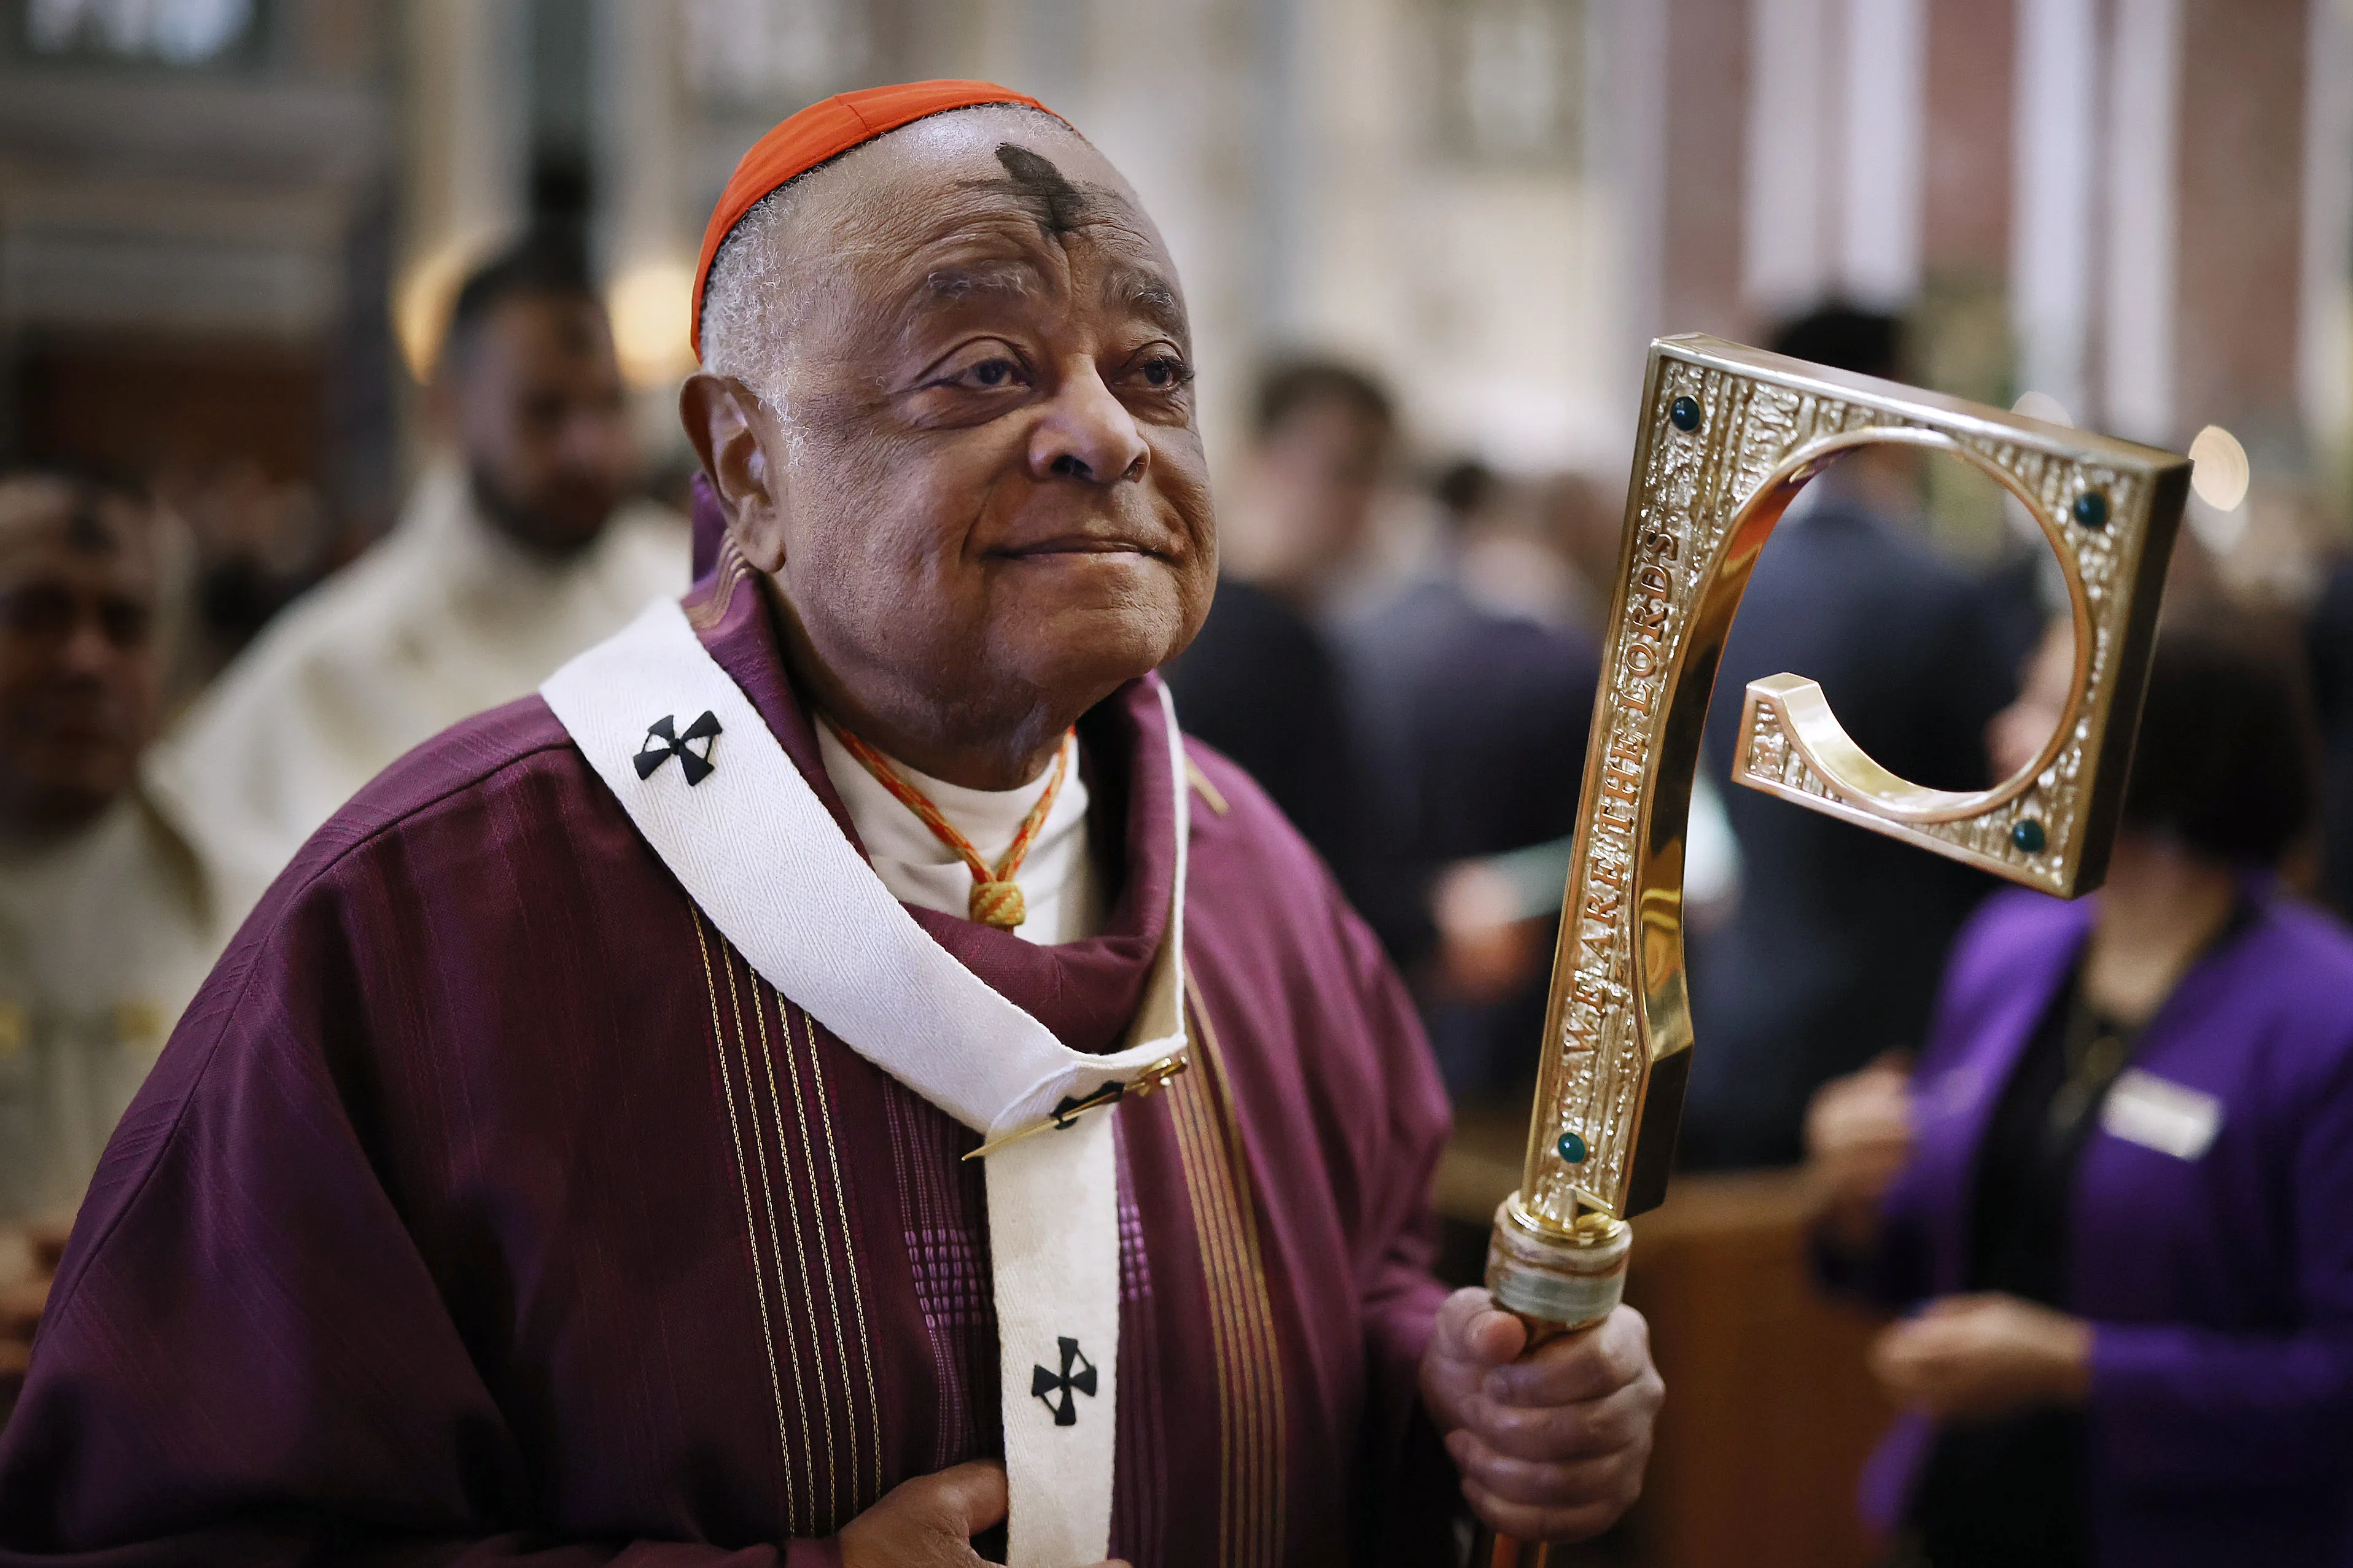 Cardinal Wilton Gregory, archbishop of Washington, leads the recession of the Mass on Ash Wednesday at the Cathedral of St. Matthew the Apostle on Feb. 22, 2023, in Washington, D.C.?w=200&h=150